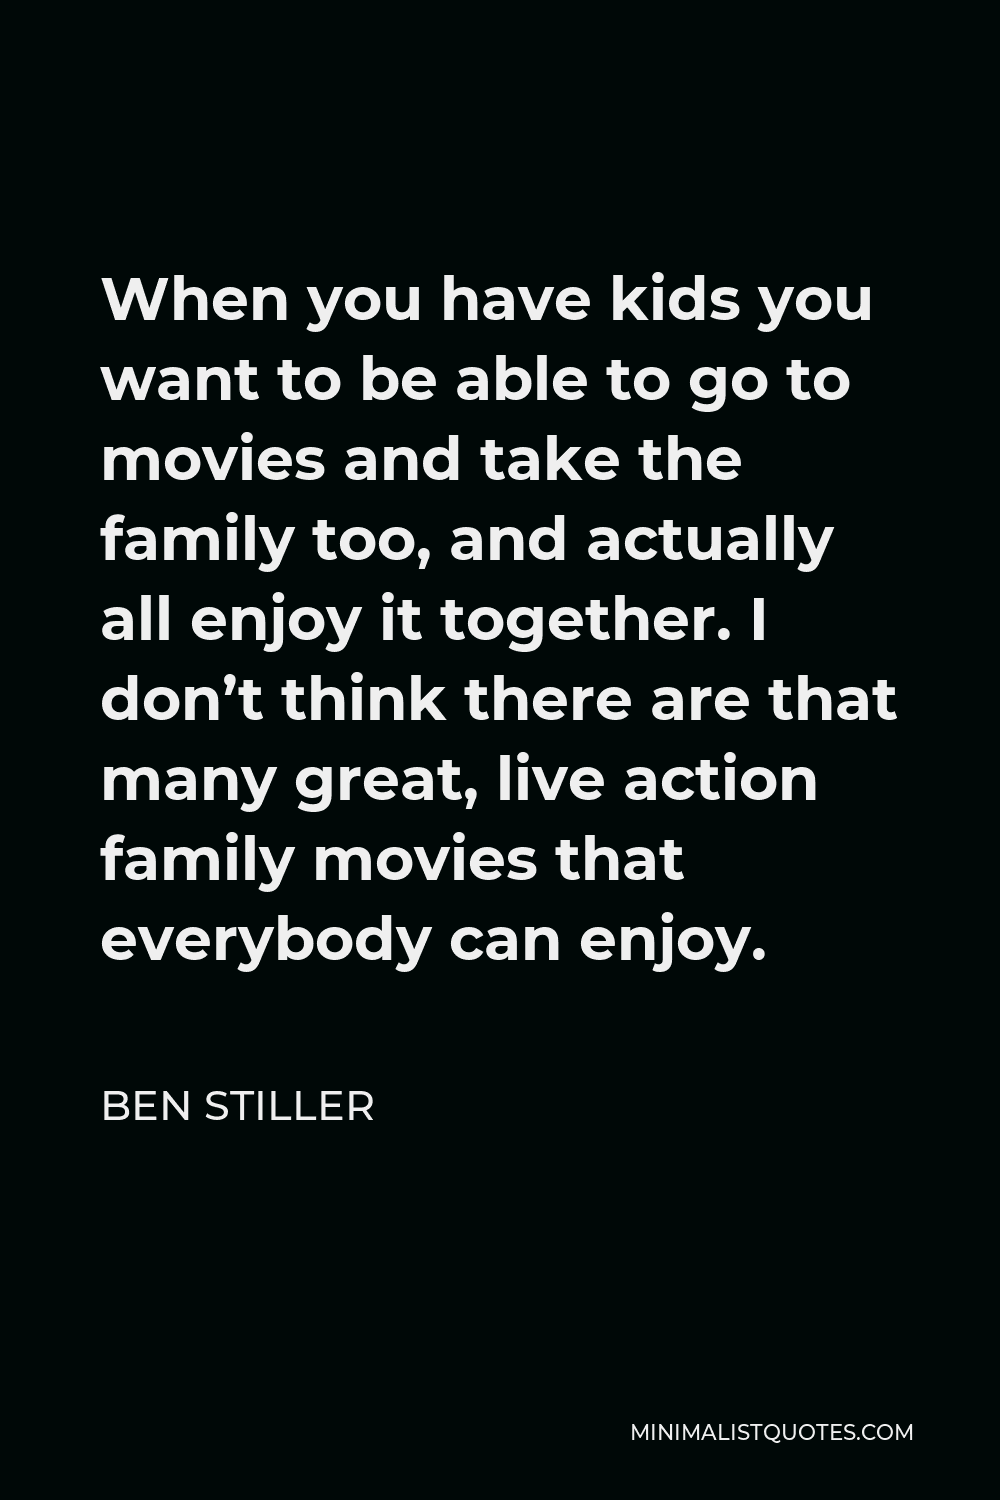 Ben Stiller Quote - When you have kids you want to be able to go to movies and take the family too, and actually all enjoy it together. I don’t think there are that many great, live action family movies that everybody can enjoy.